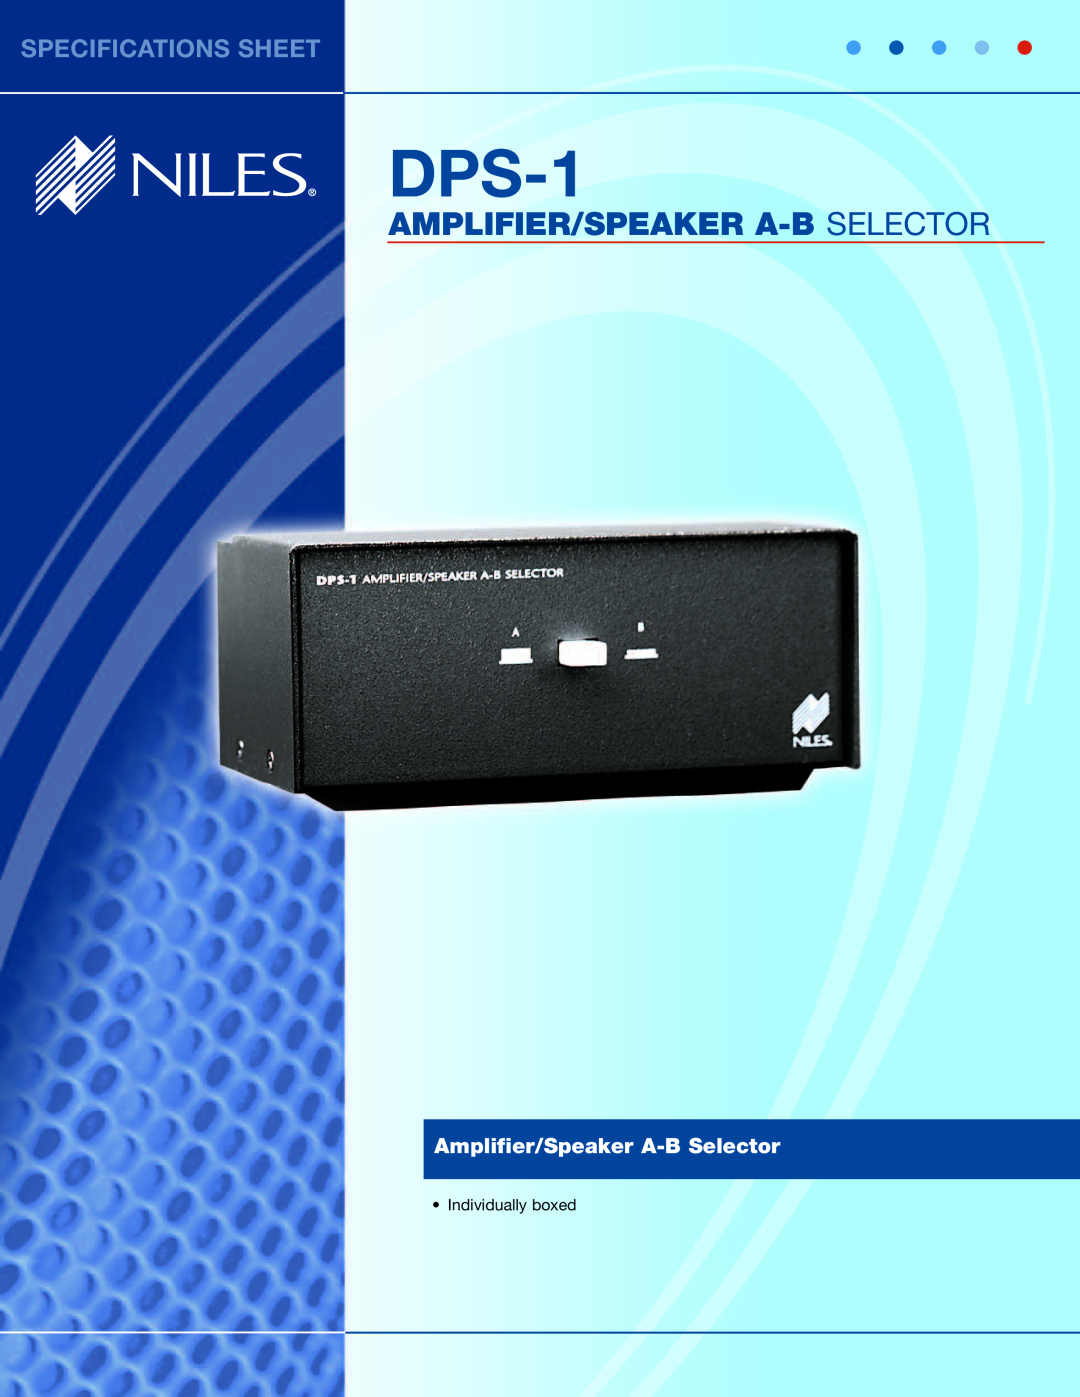 Niles Audio DPS-1 specifications Individually boxed, Amplifier/Speaker A-B Selector, Specifications Sheet 